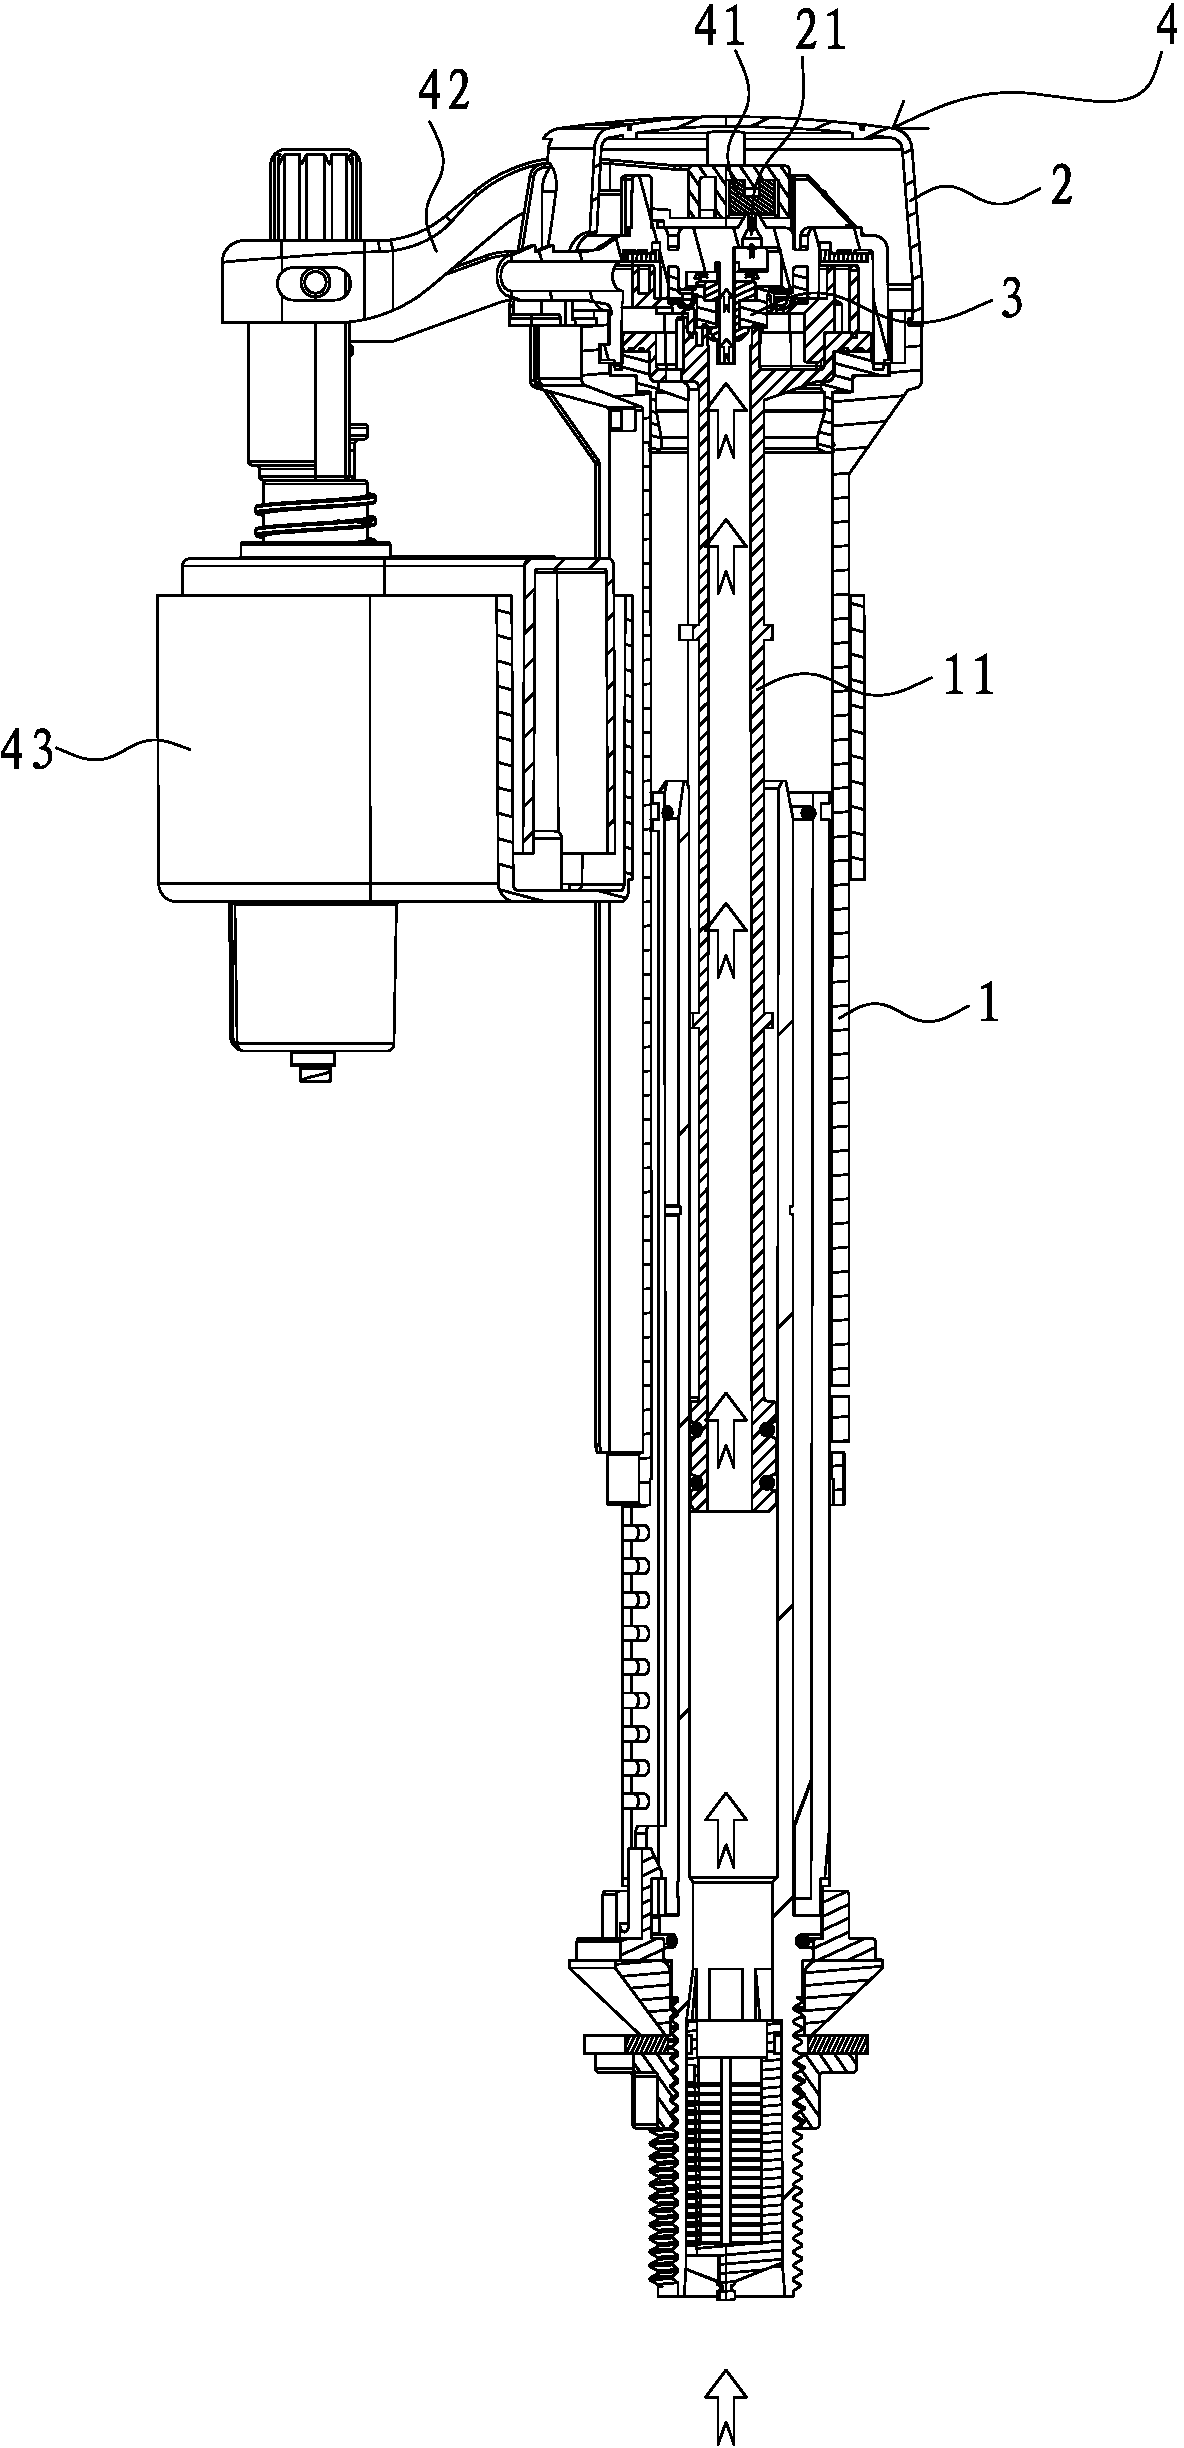 Anti-siphon structure for water inlet valve